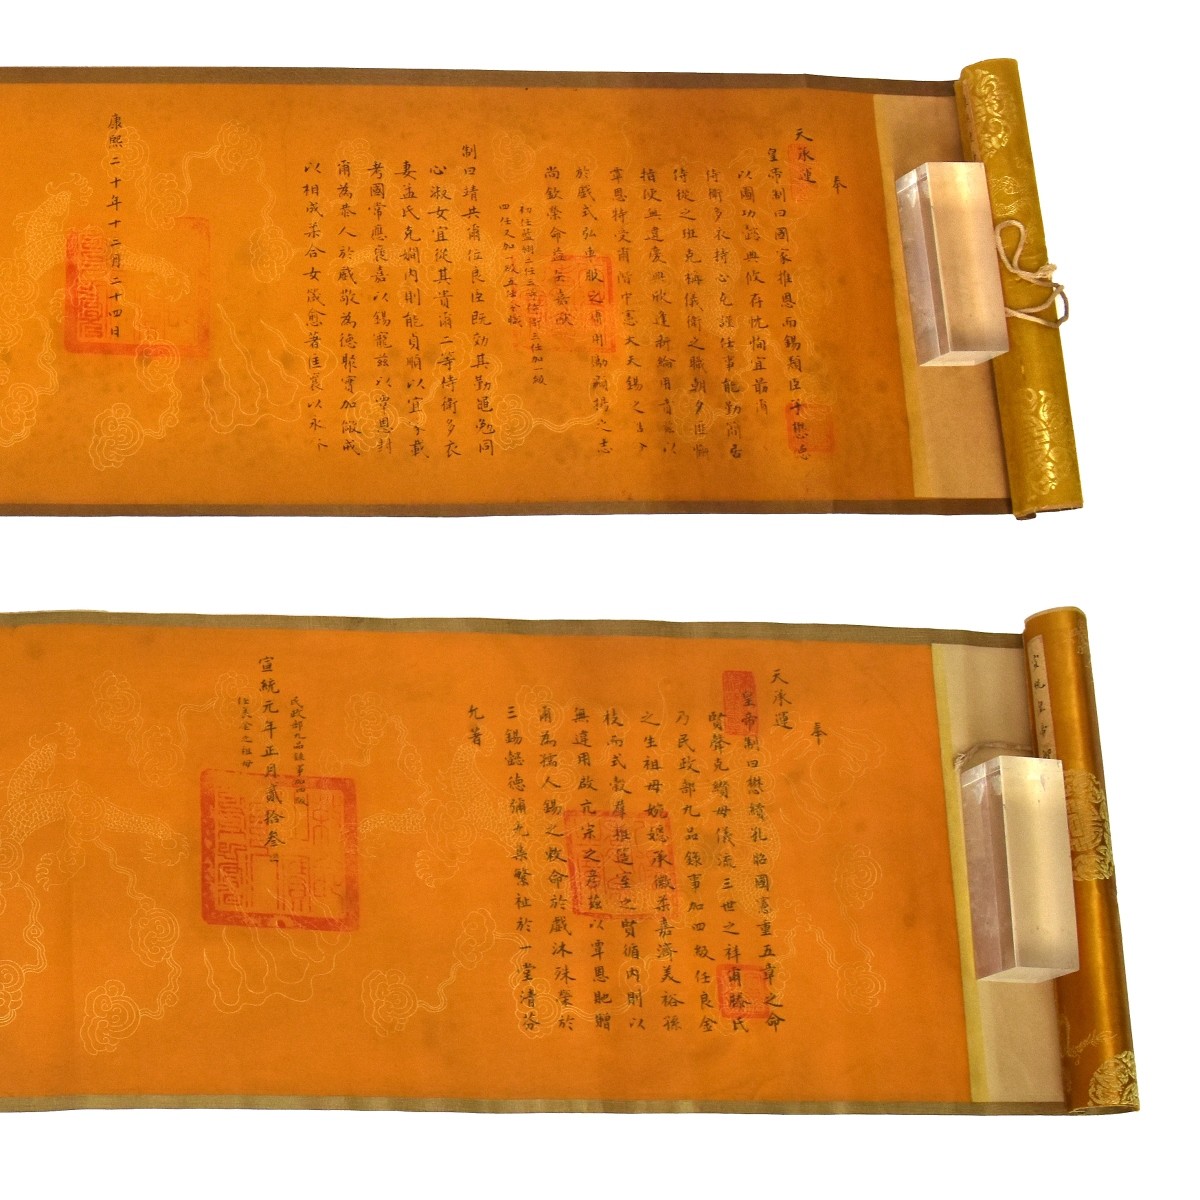 Chinese Imperial Edict Scrolls